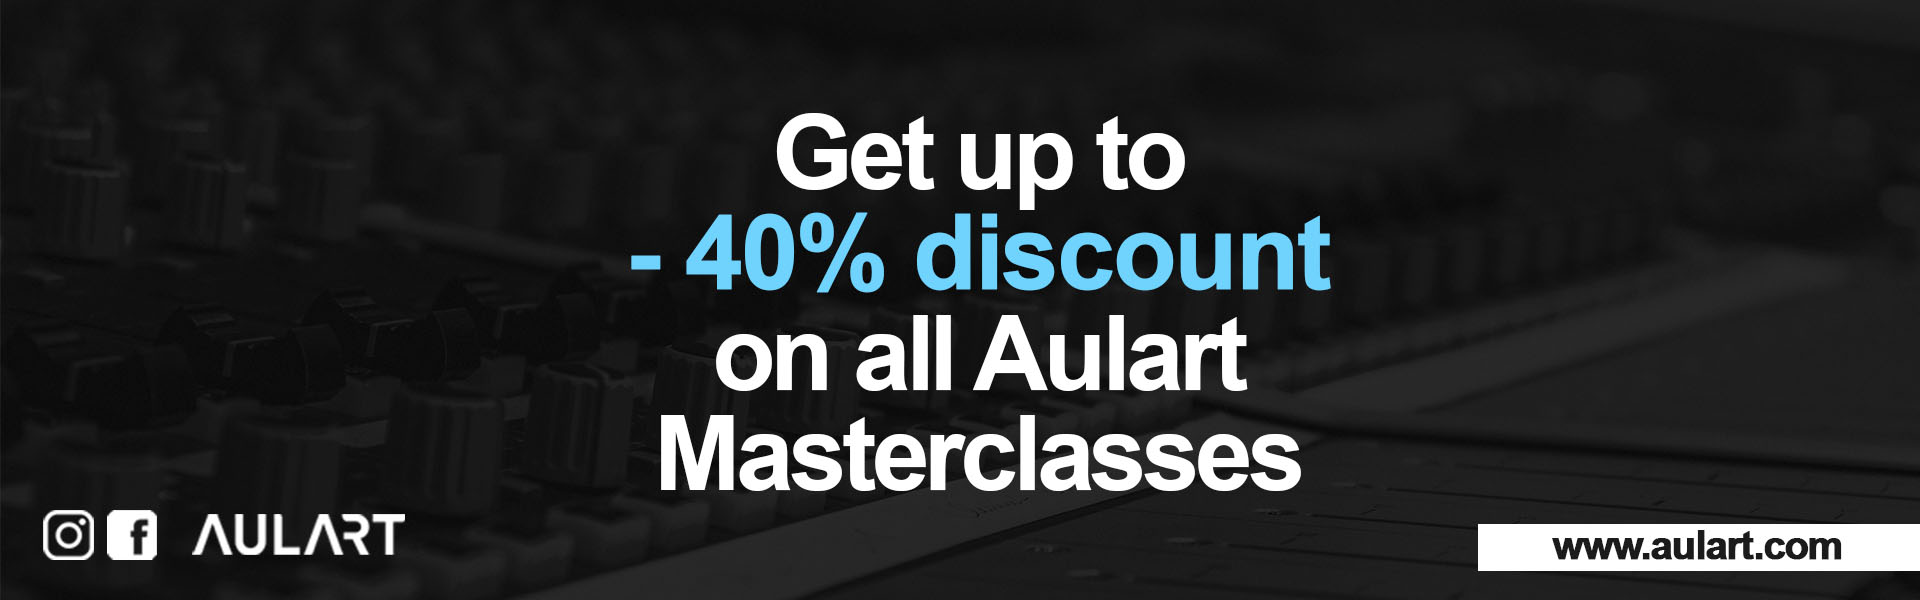 Subscribe and get 40% discount with Aulart